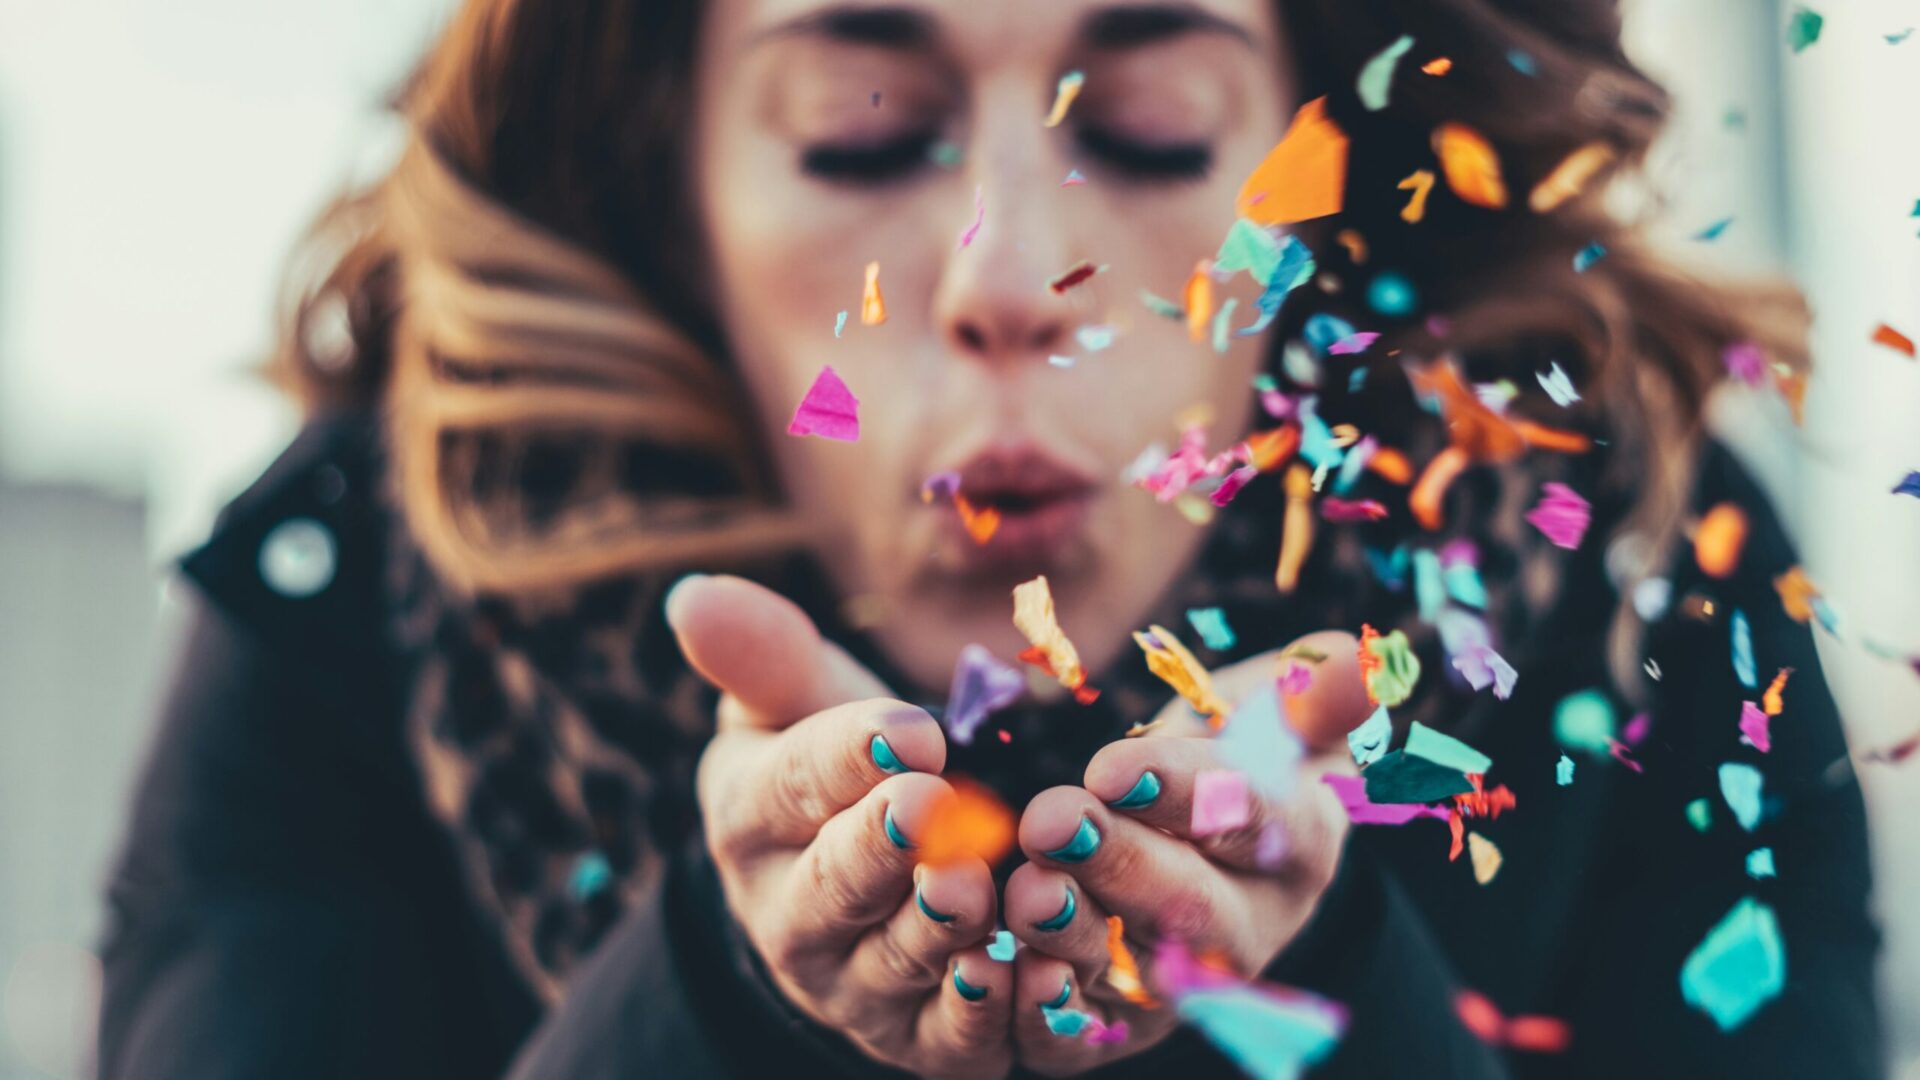 Going fit in mind, body, & connections with woman blowing confetti out of her hands scaled